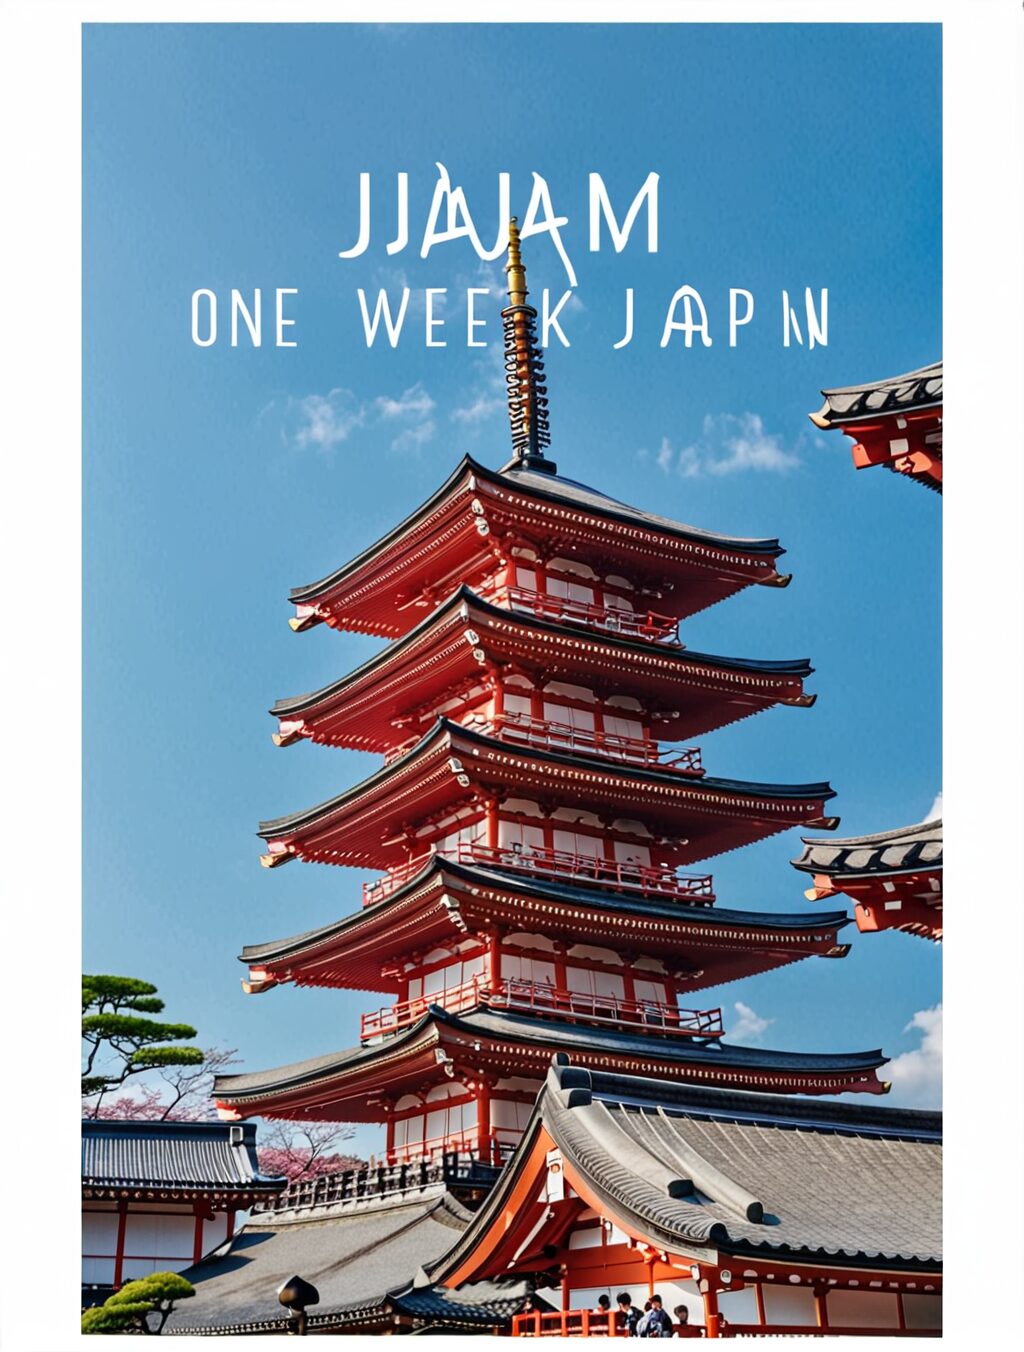 one week japan itinerary with kids